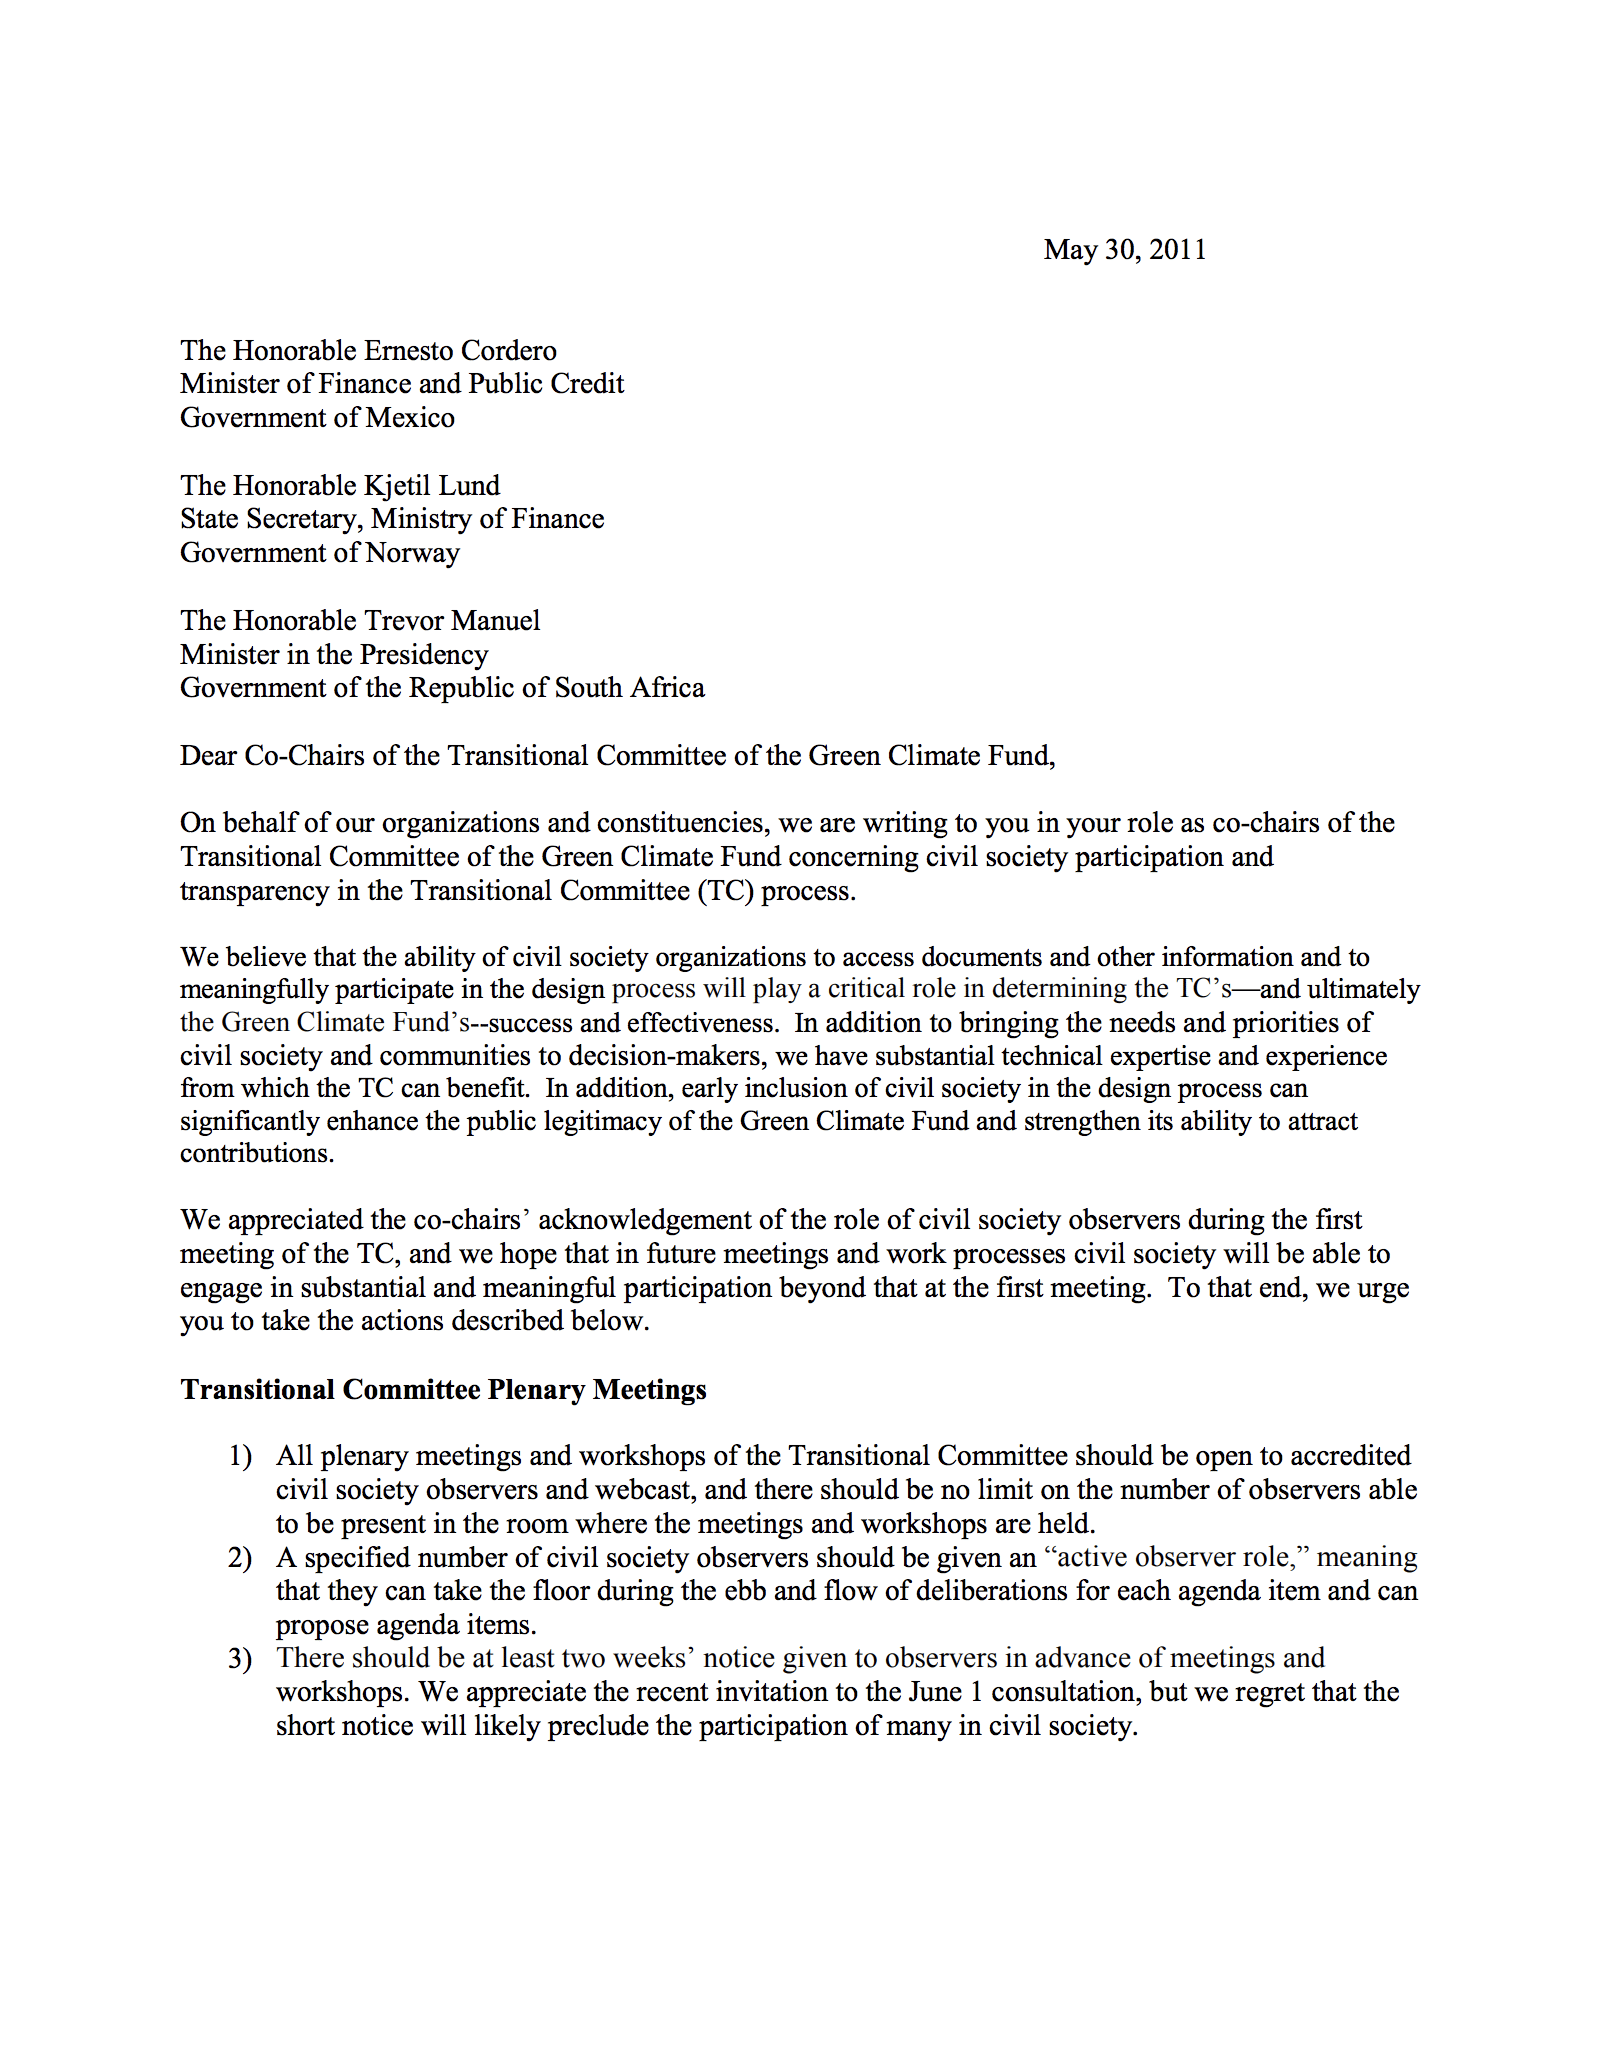 Letter to GCF Transitional Committee (May 2011)